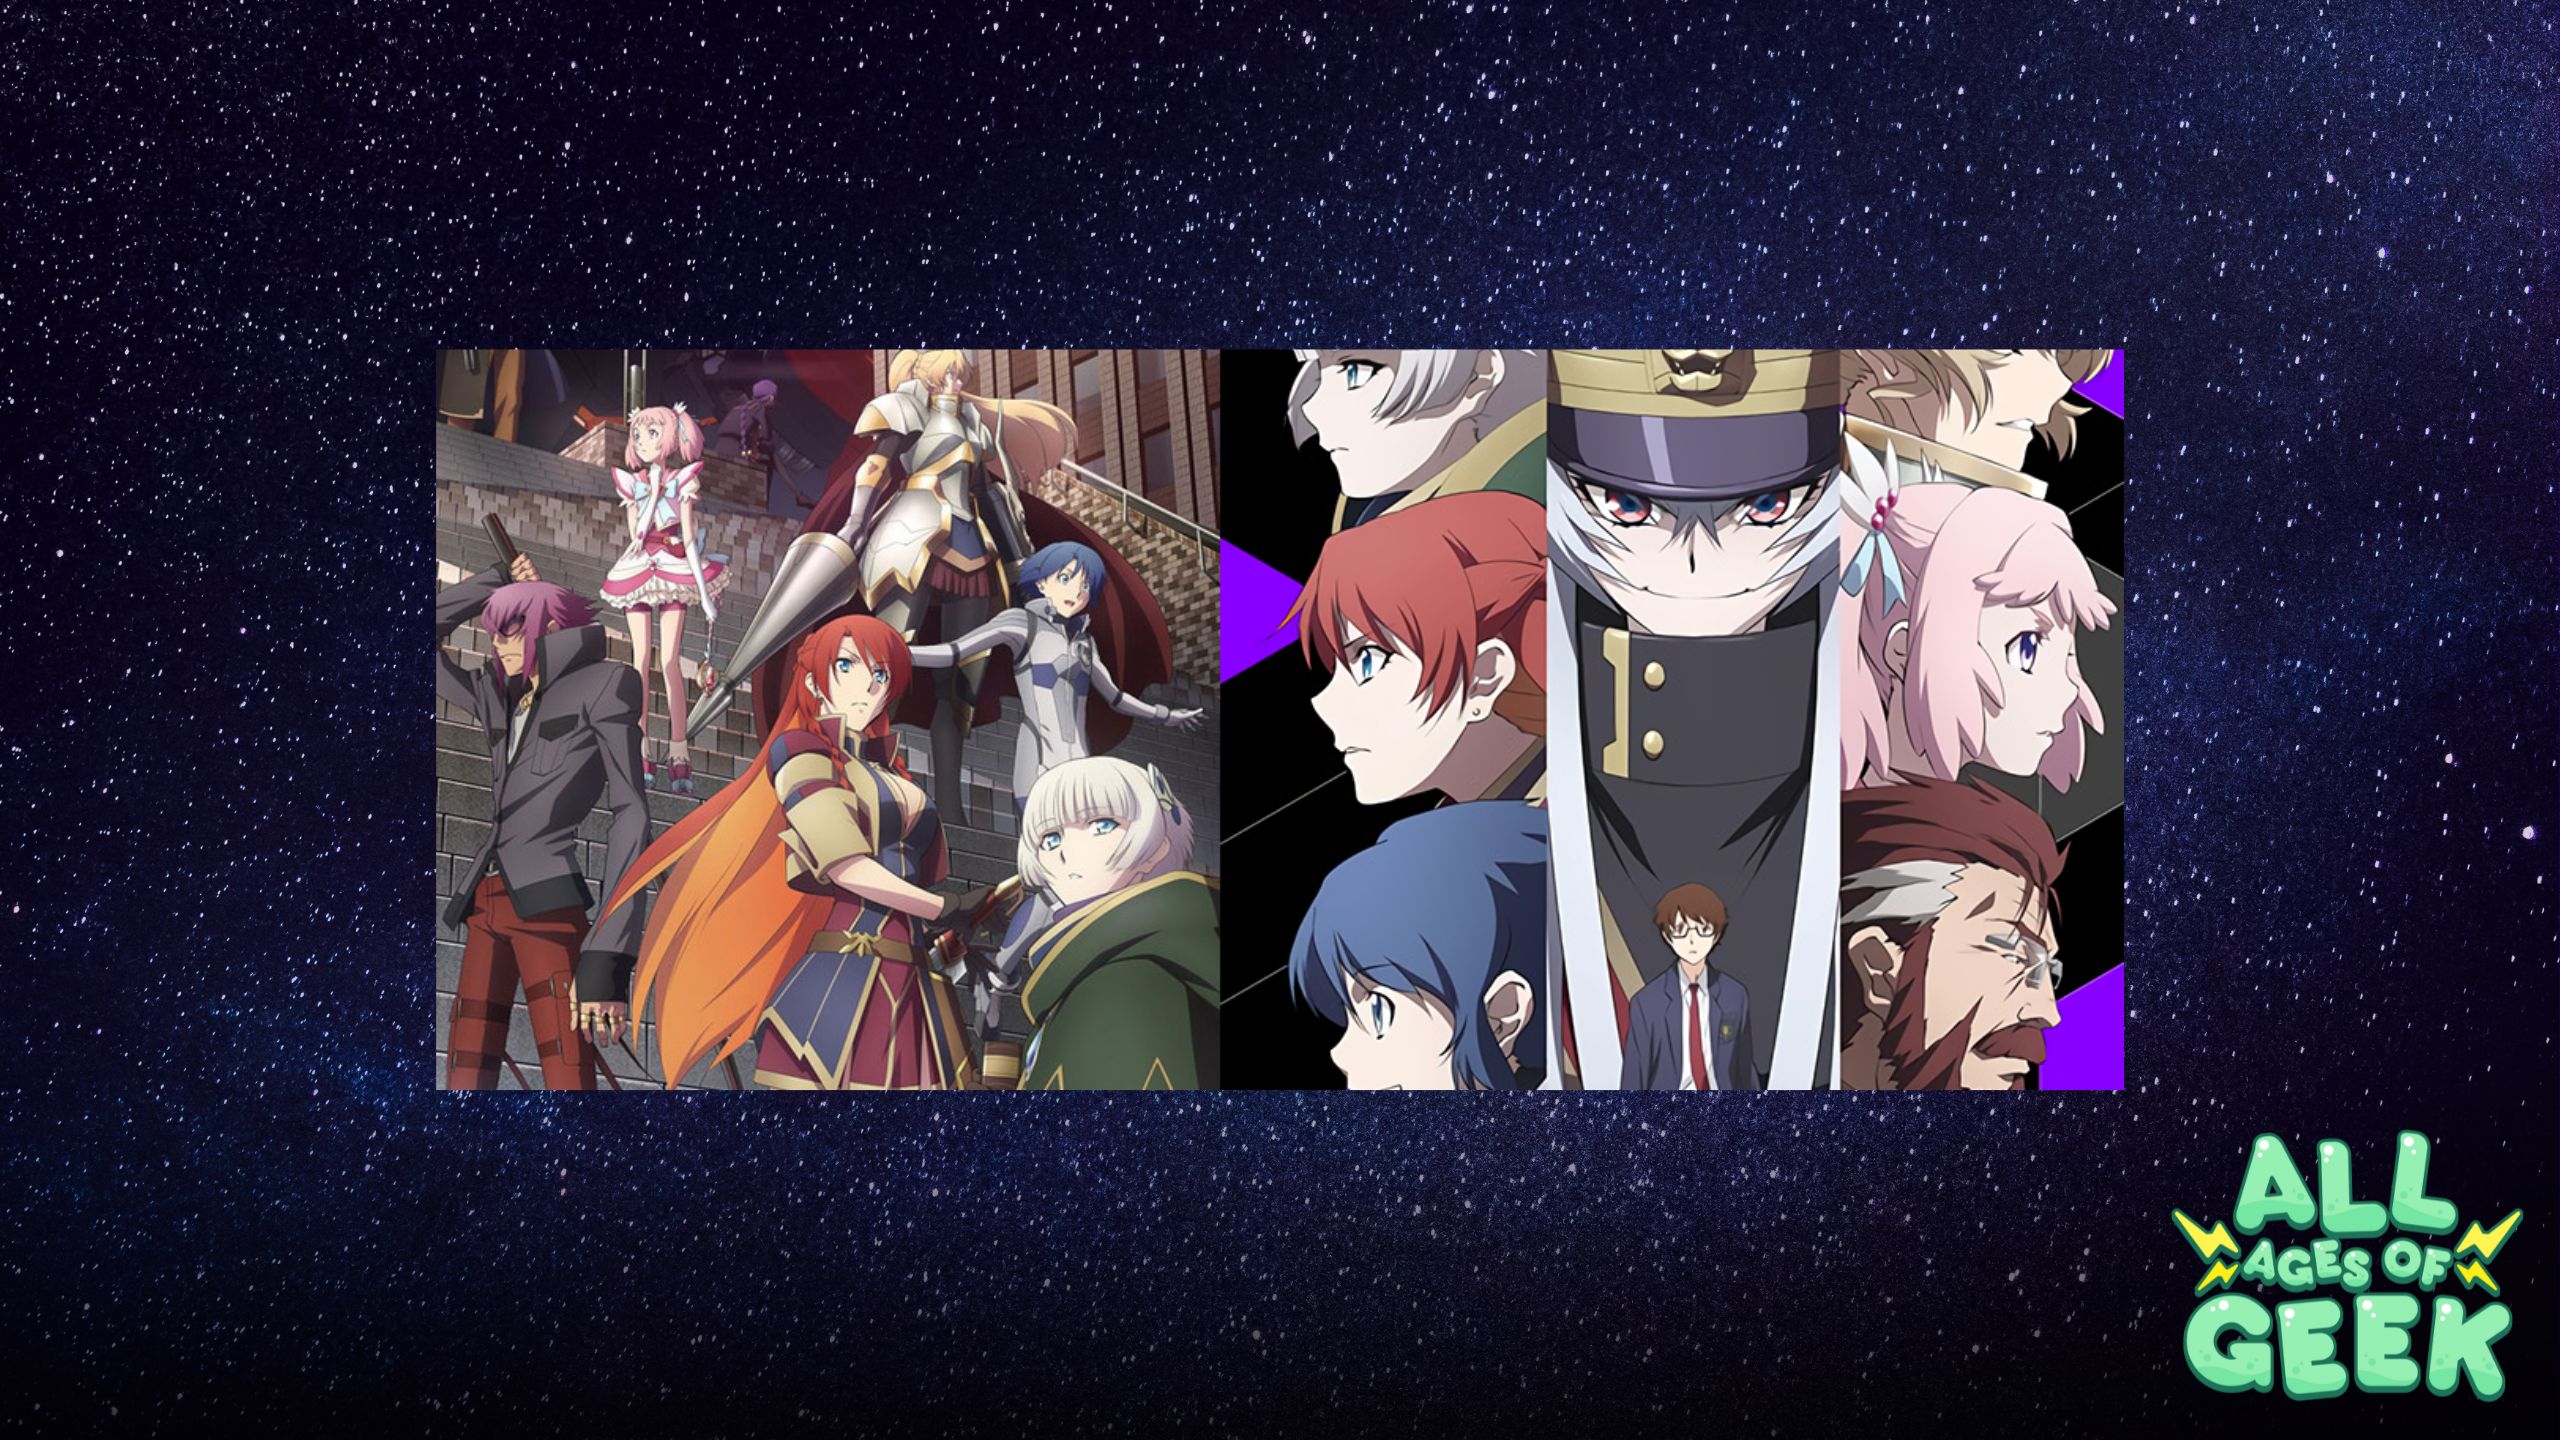 Much more than just an anime! Exploring the depths of Re:CREATORS